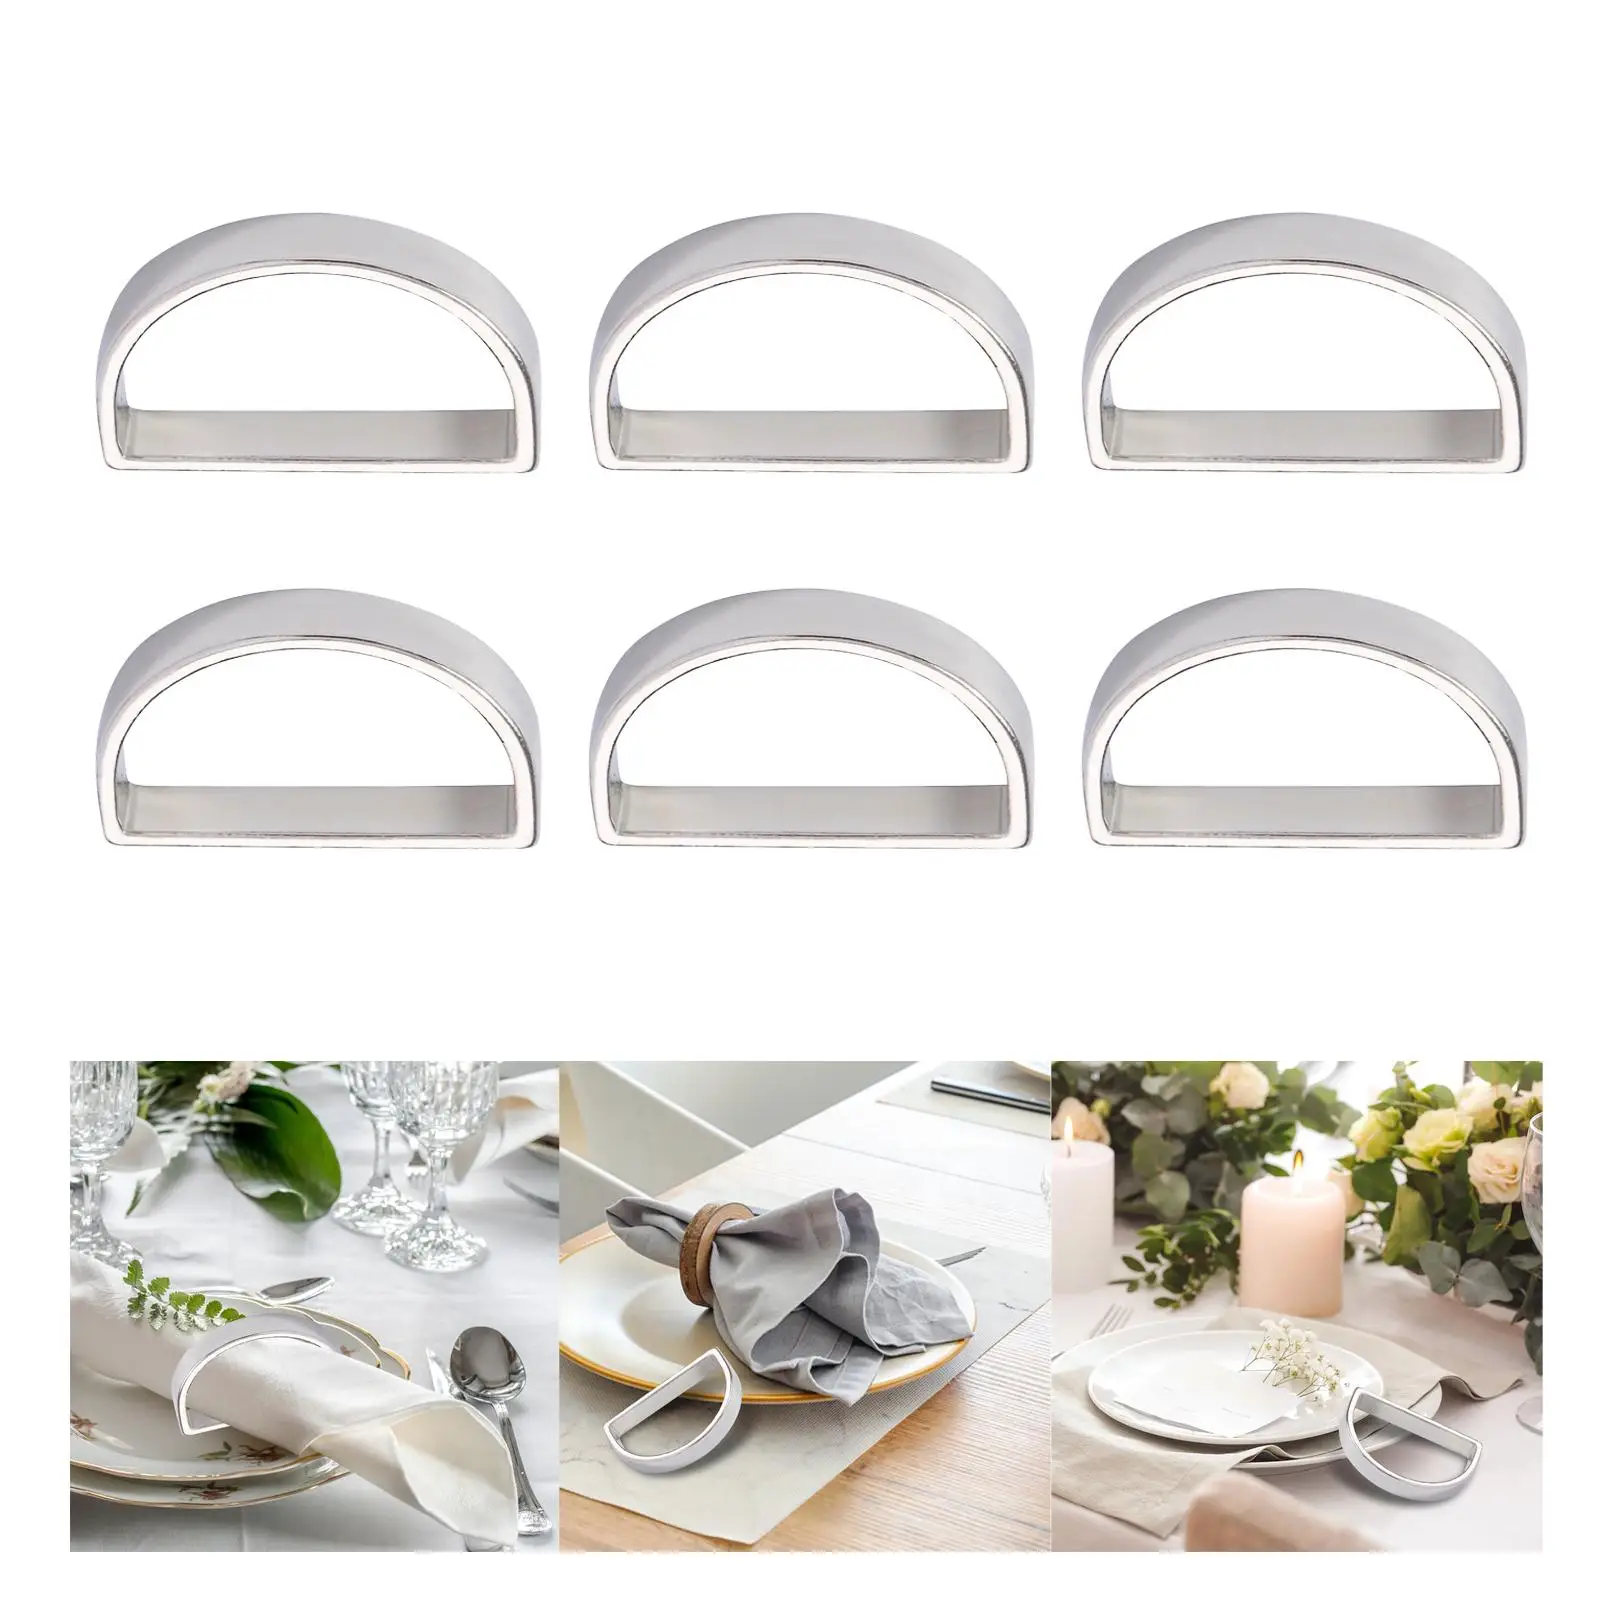 6x Napkin Holder Rings Adornment for Table Setting Family Gatherings Holiday